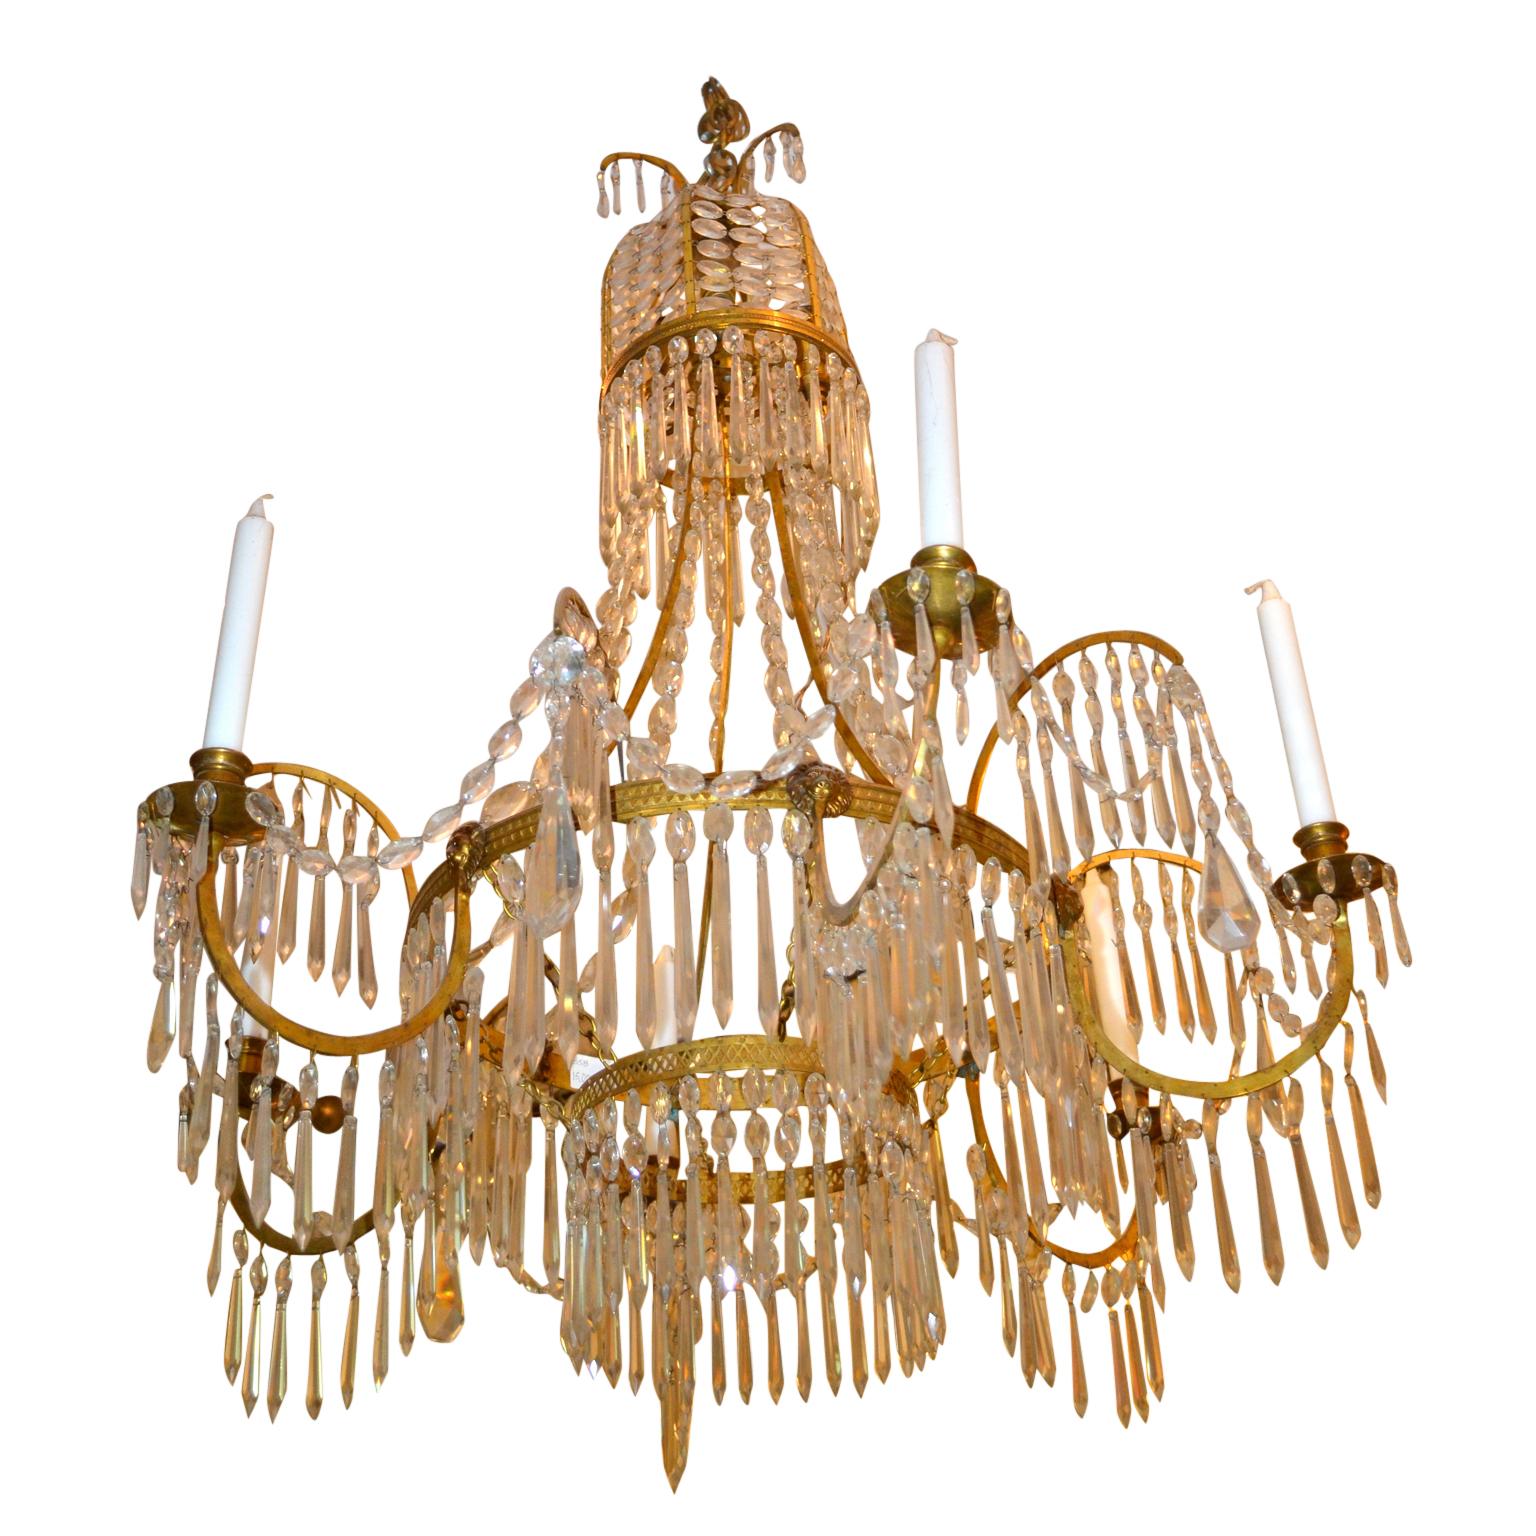 Neoclassical 19 Century Baltic Empire Style Crystal and Gilt Bronze Chandelier